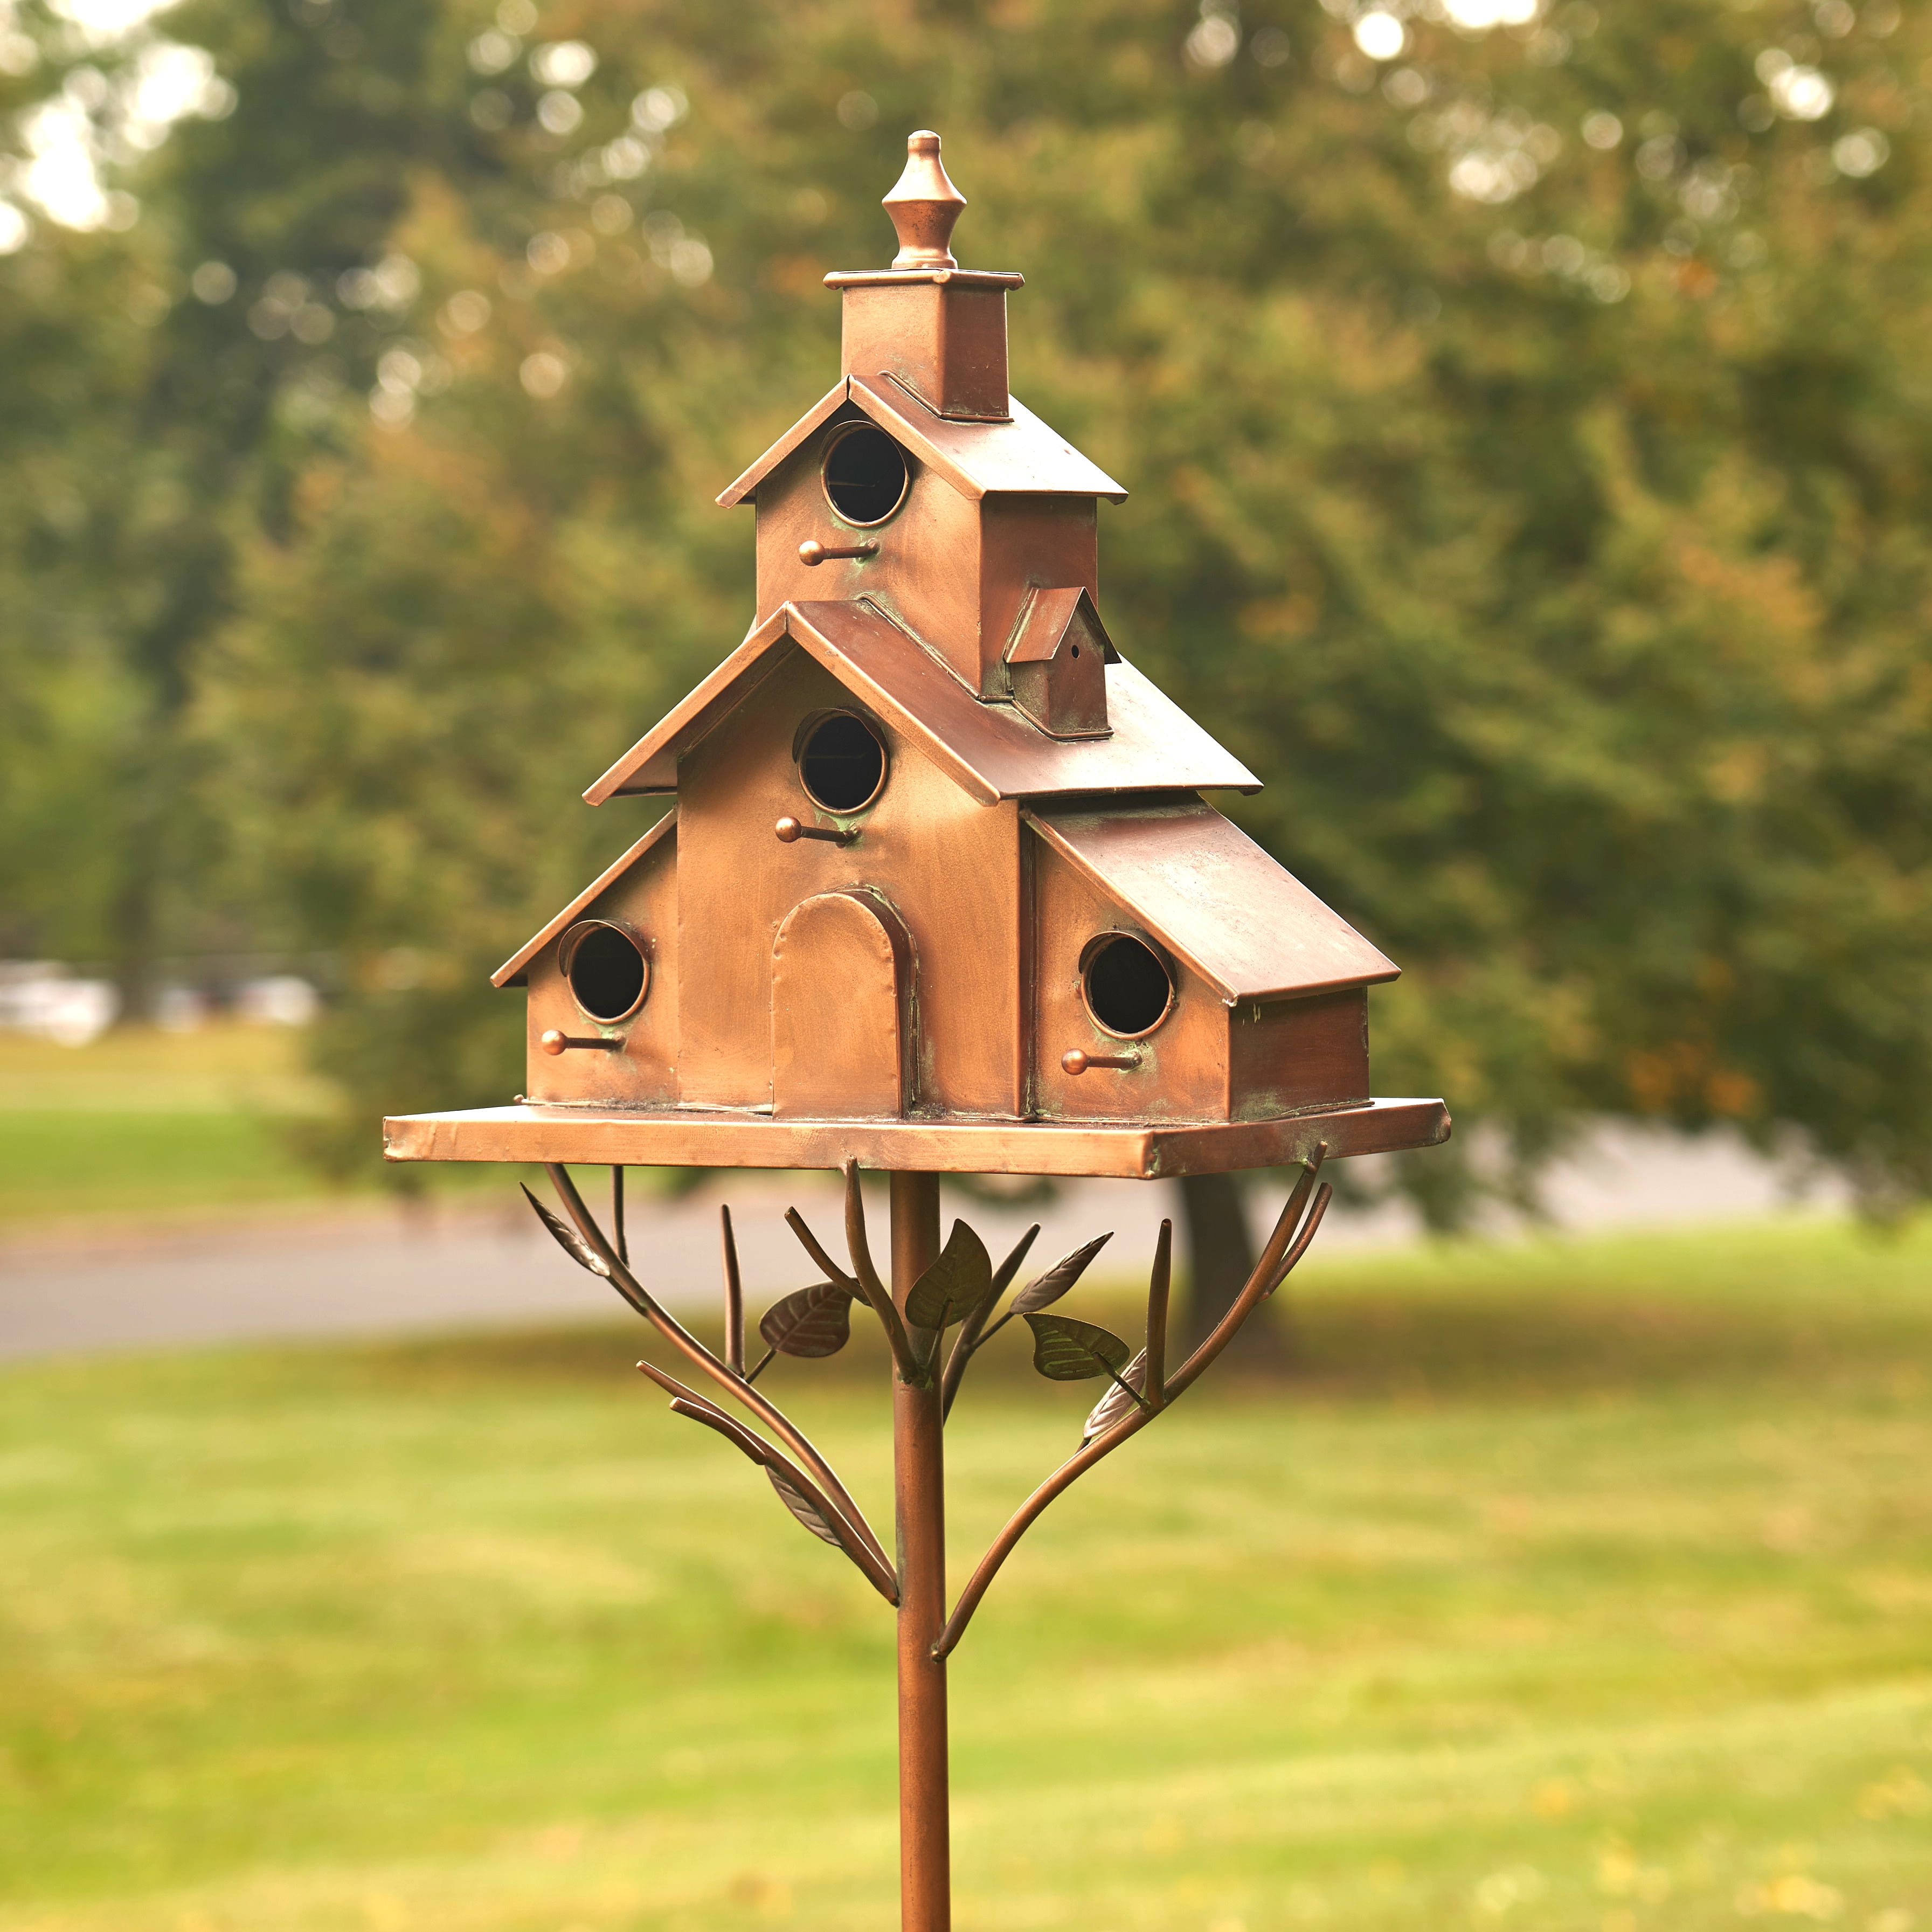 Copper Colored Multi-Birdhouse Stakes Room for Multiple Bird Families in Each 